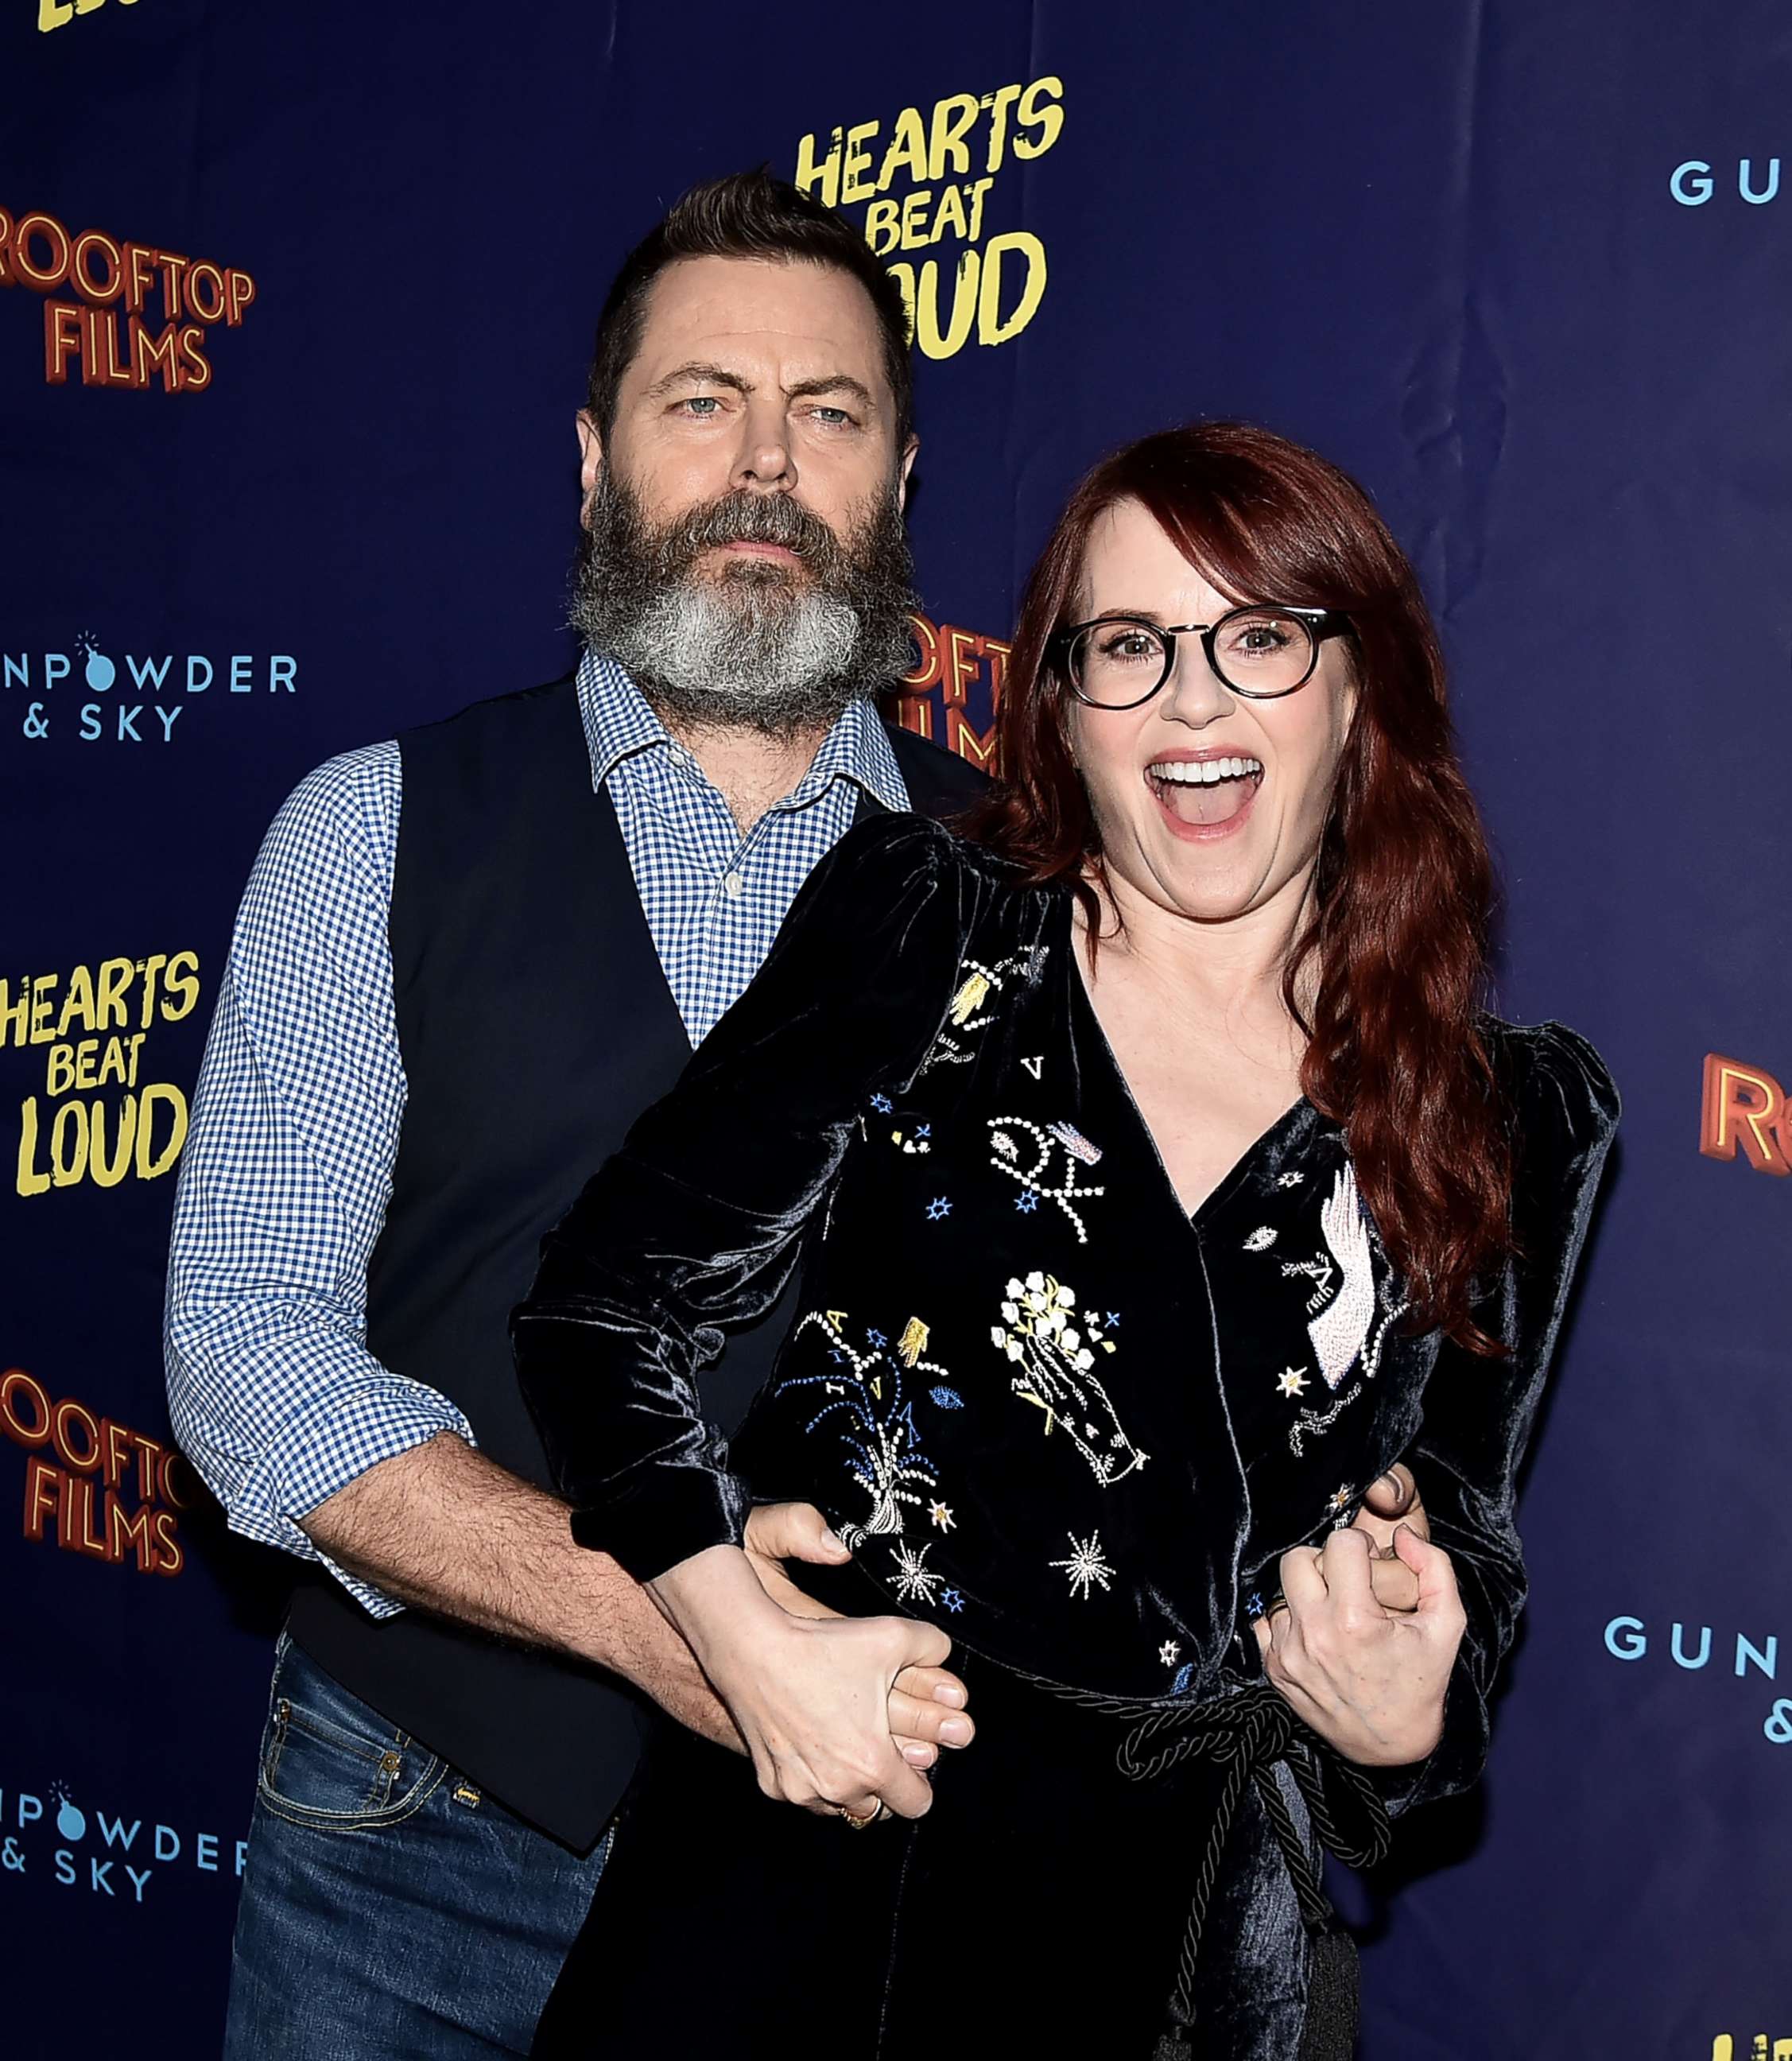 PHOTO: Nick Offerman and Megan Mullally attend the "Hearts Beat Loud" New York Premiere on June 6, 2018, in New York City.